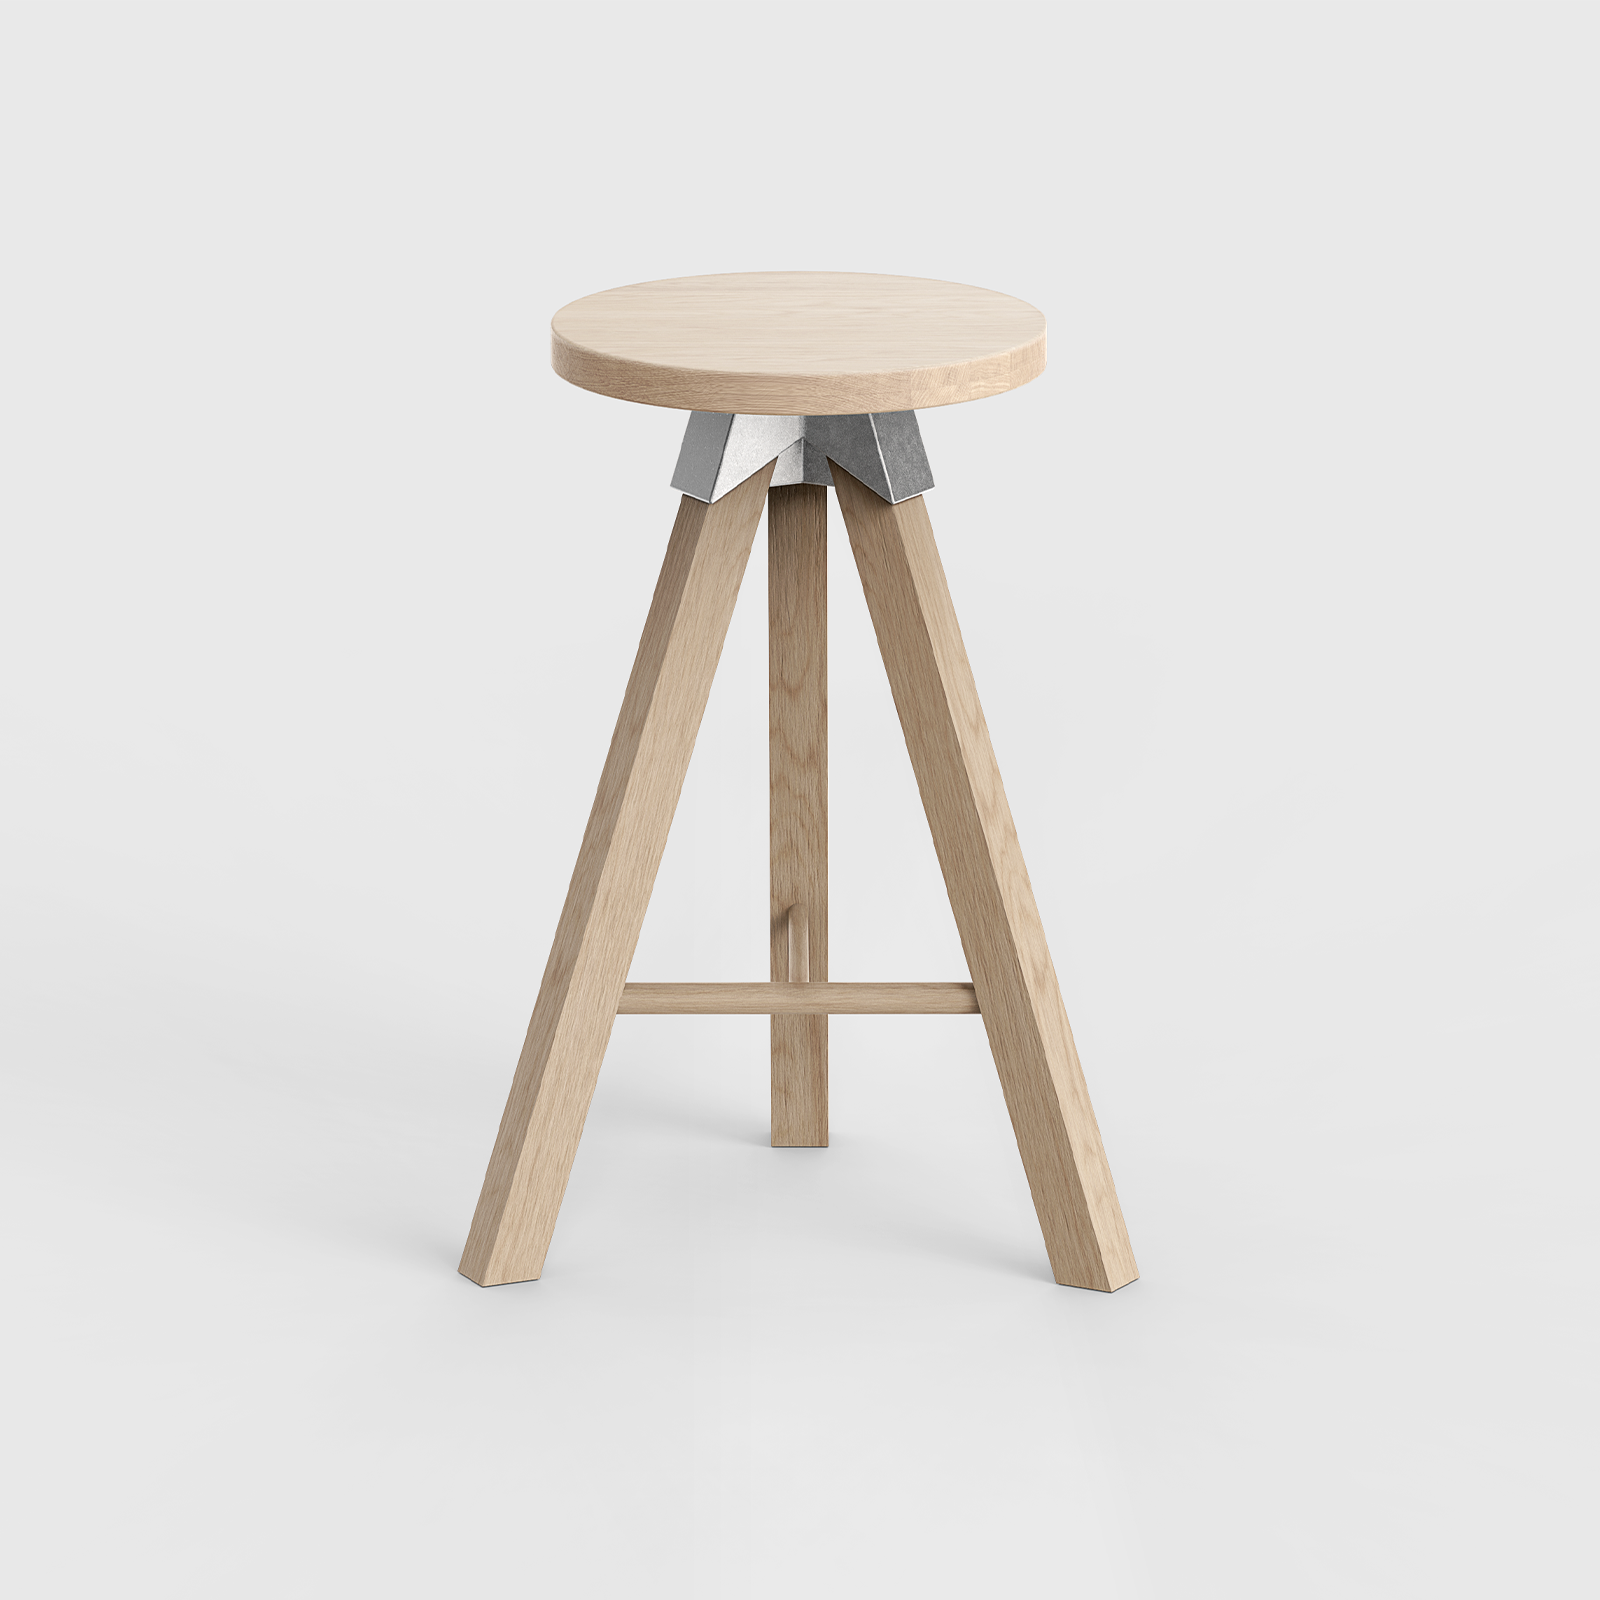 A-joint tall stool in solid American Oak with cast aluminium A-joint